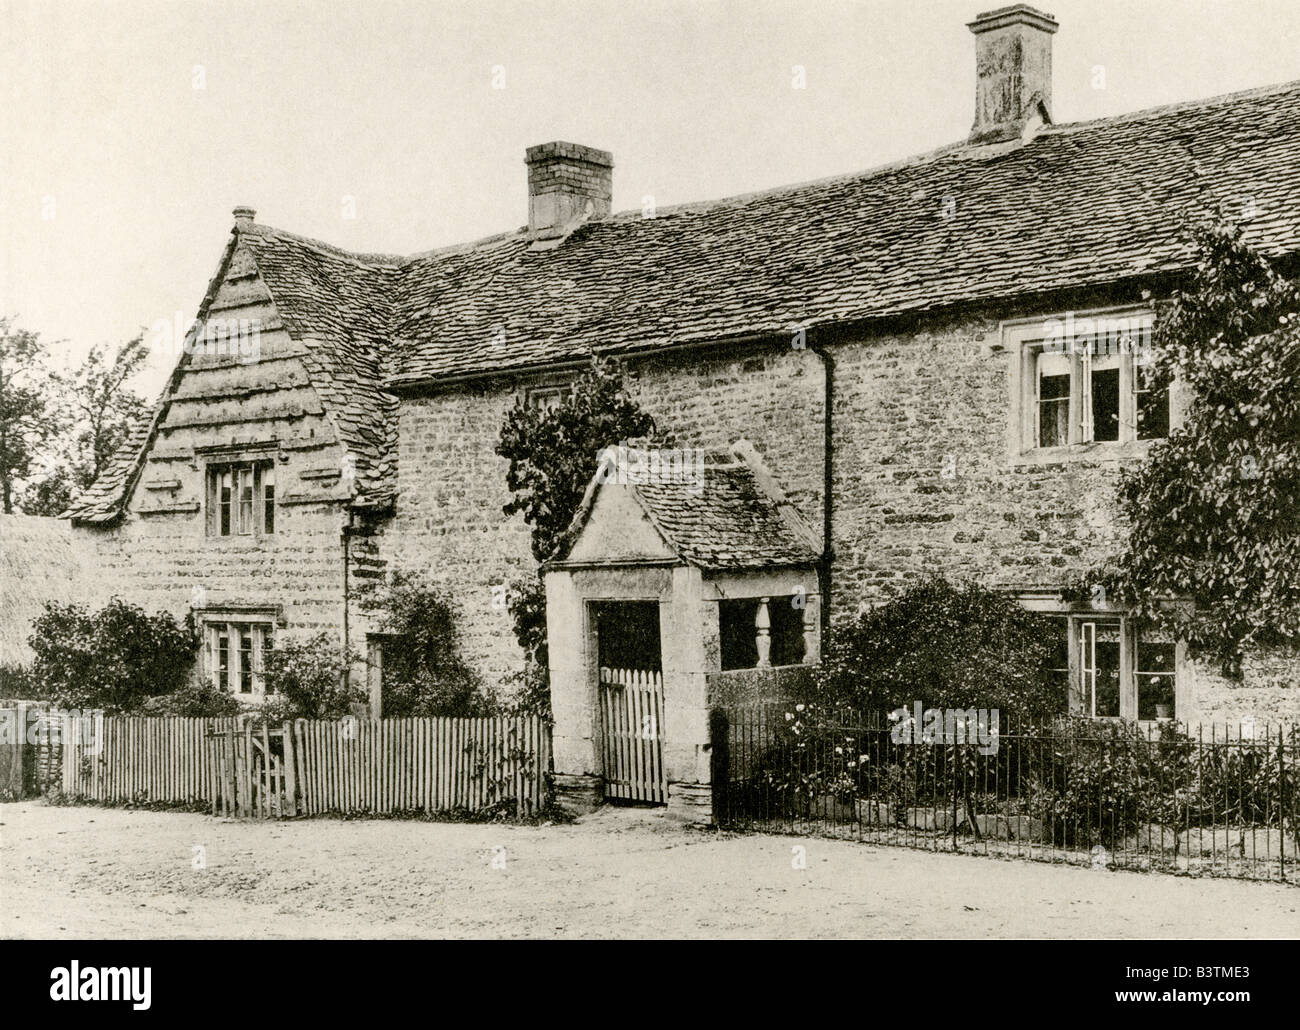 A collotype plate  ' Cottage with Porch, Little Rissington, Glos.' scanned at high resolution from a book published in 1905 Stock Photo